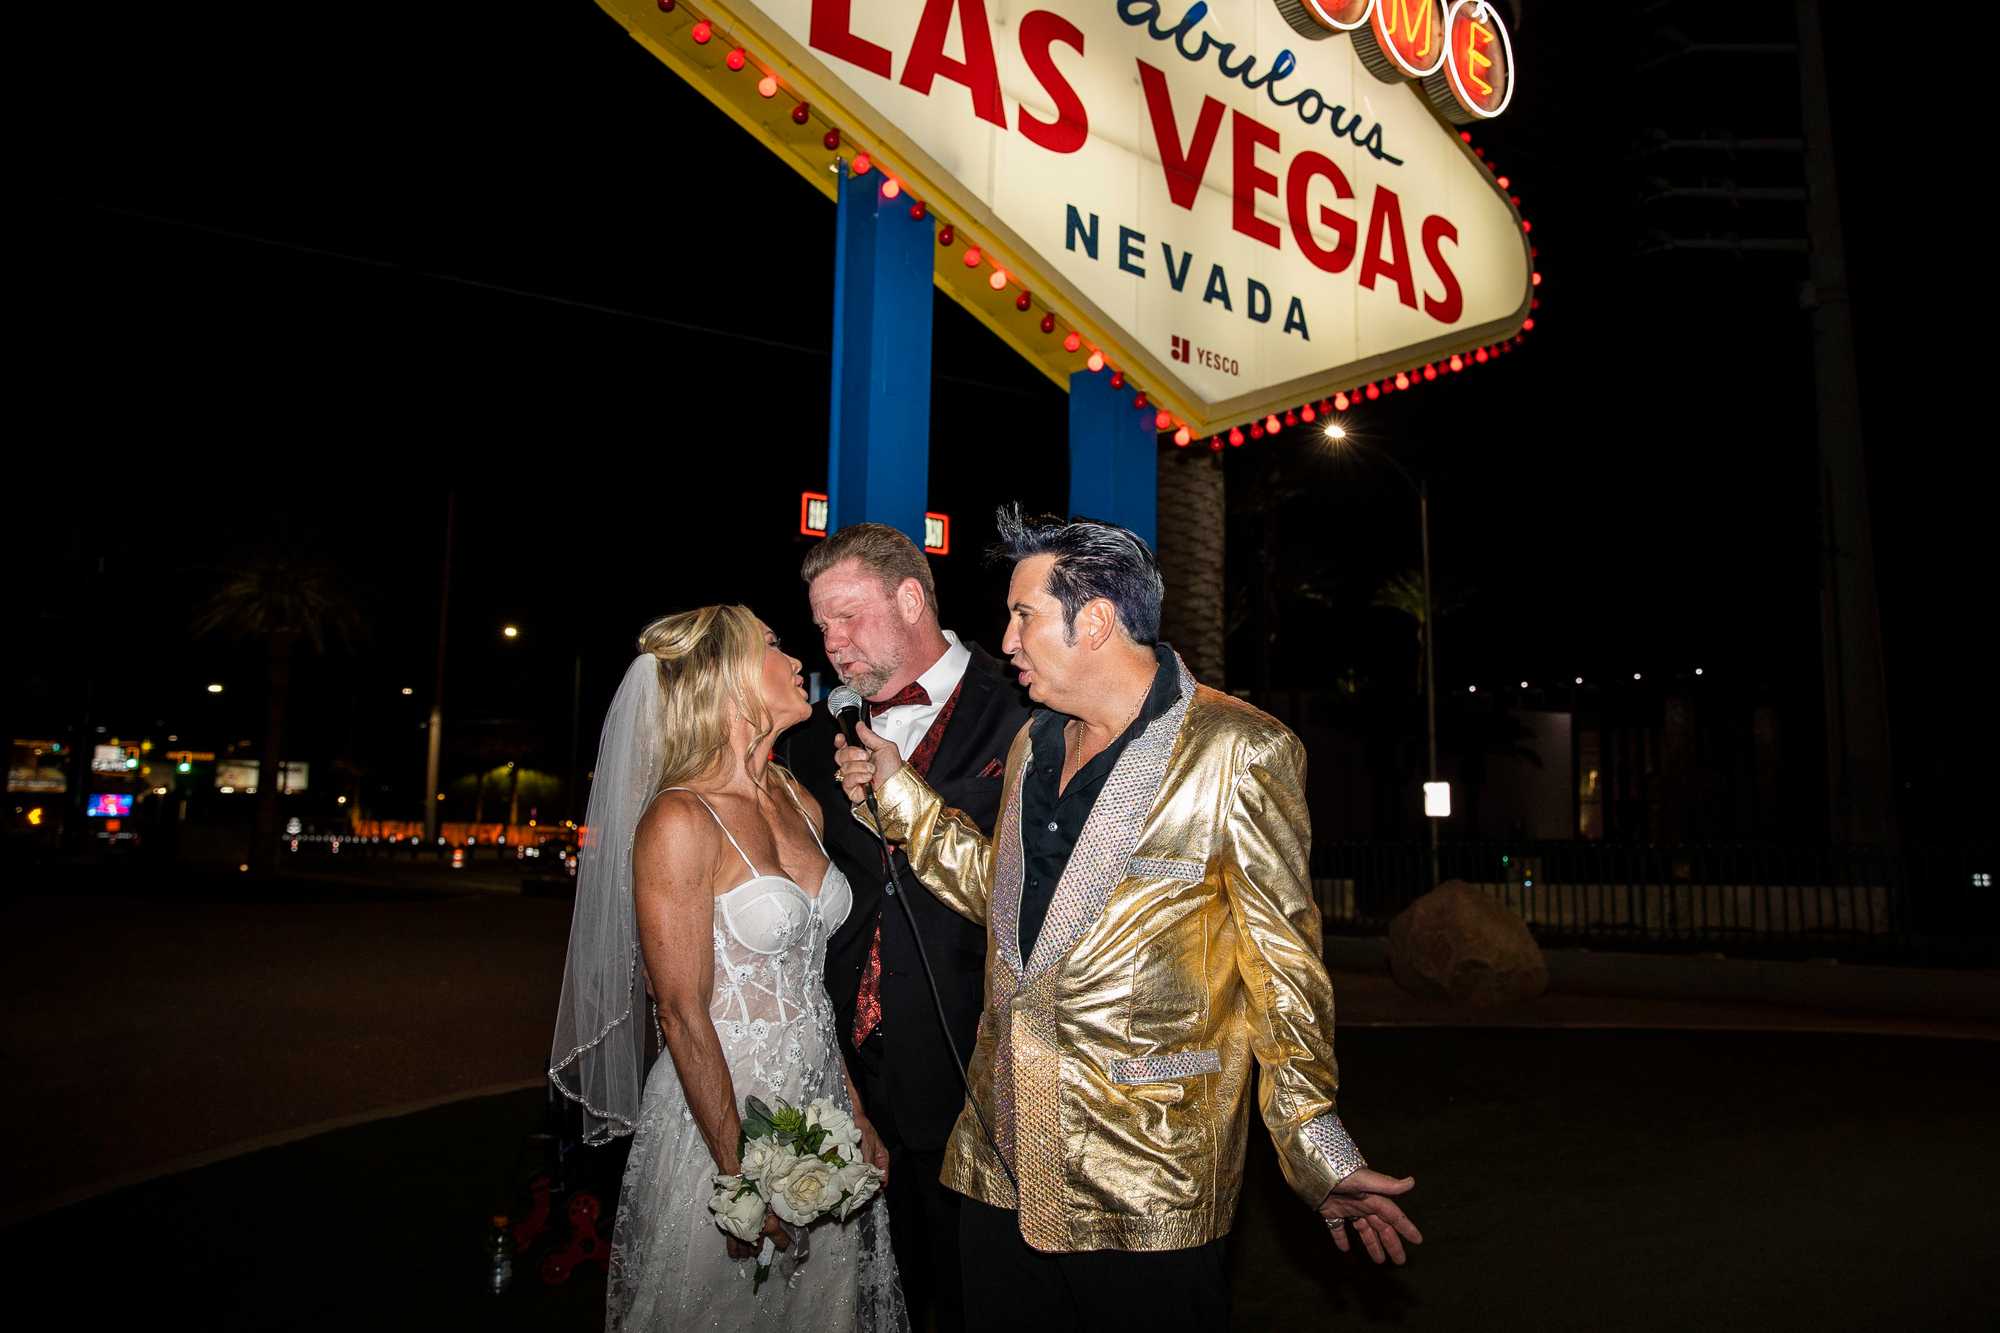 Jesse Grice, an Elvis impersonator for more than 30 years, officiated a ceremony for Susan and Dean Norsworthy underneath the famous “Welcome to Fabulous Las Vegas sign” that marks the beginning of the Strip.